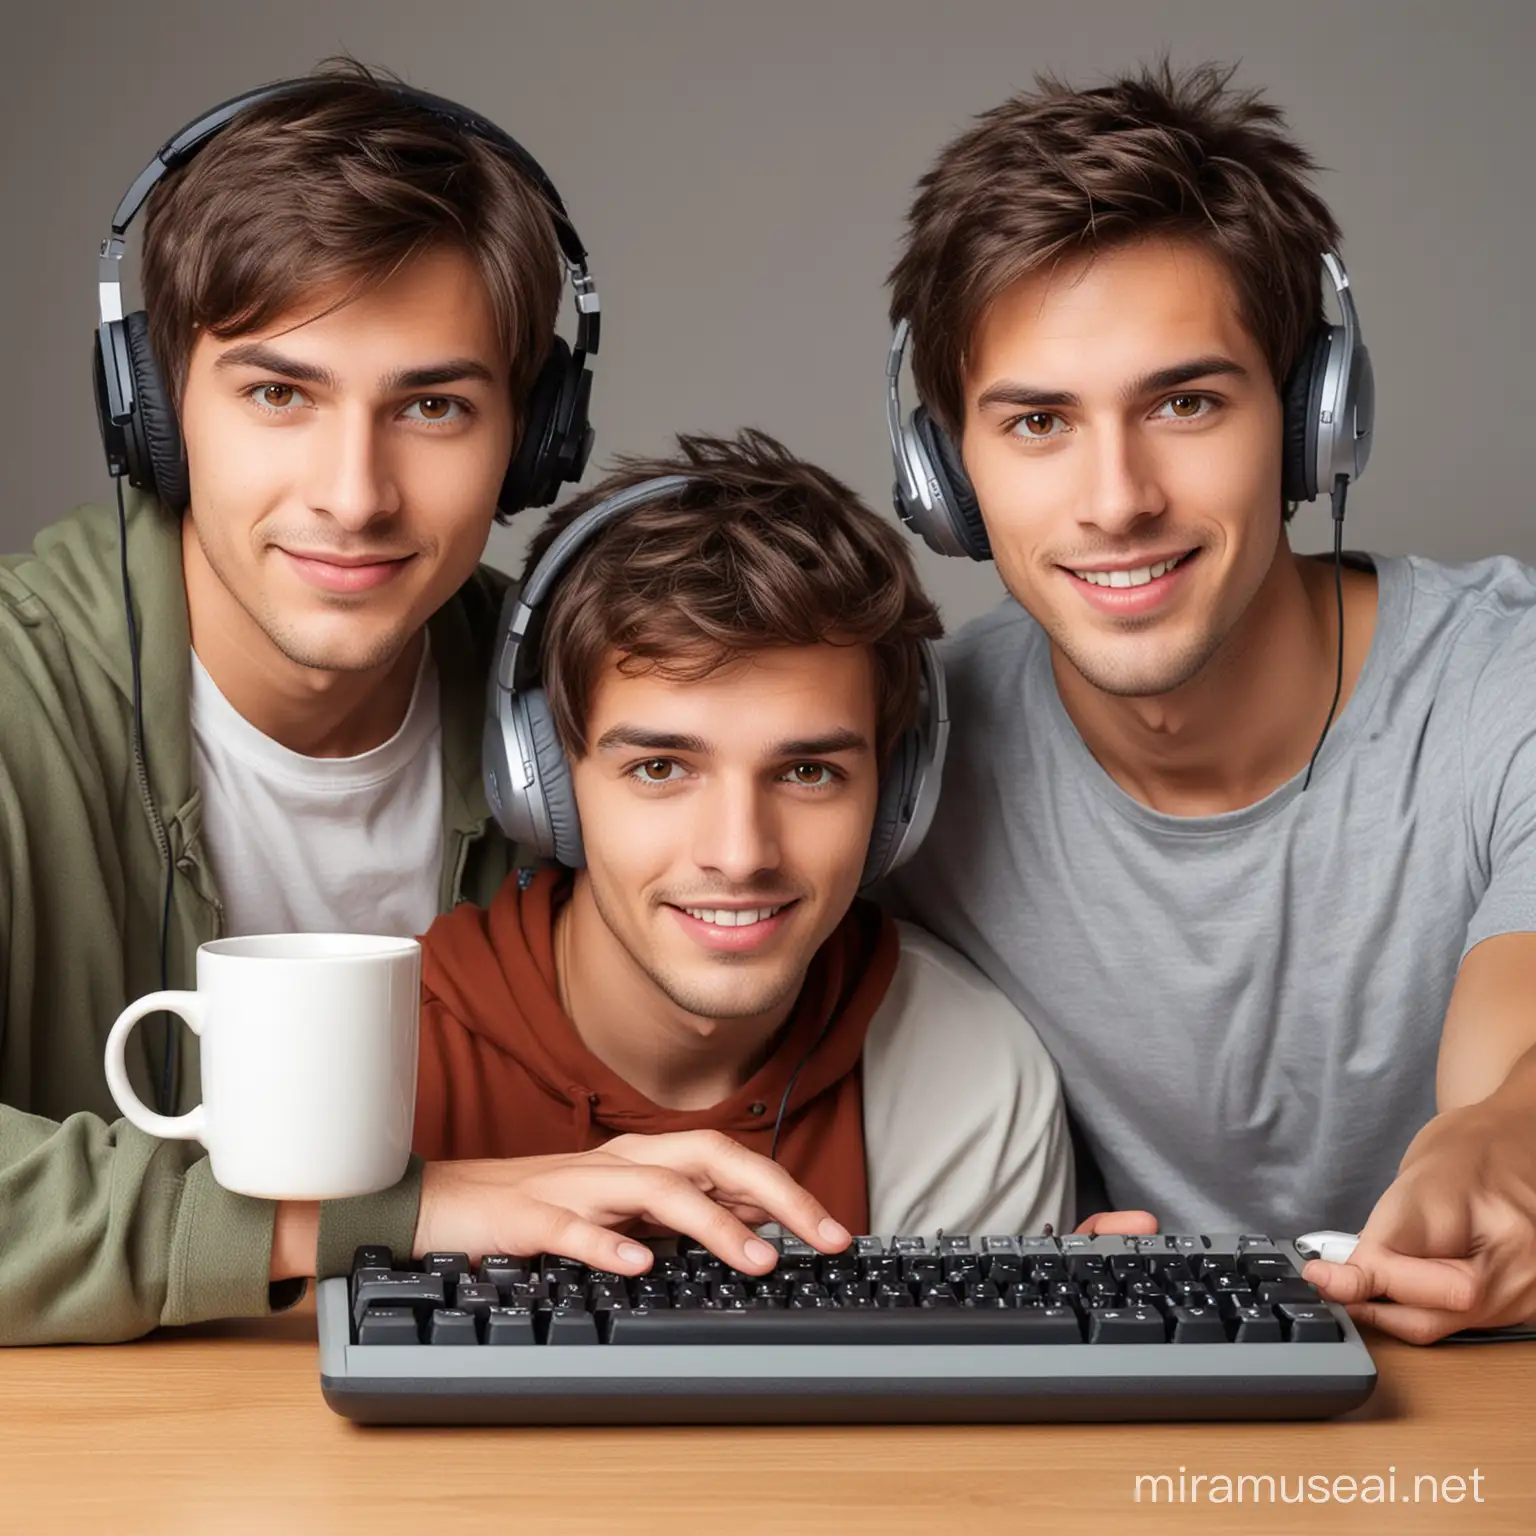 three guys with the same facial features , brown hair and gray eyes , one of them with headphones holds a keyboard in one hand and a computer mouse in the other, the second guy holds a mug of tea , and the third points with his index finger at the first guy